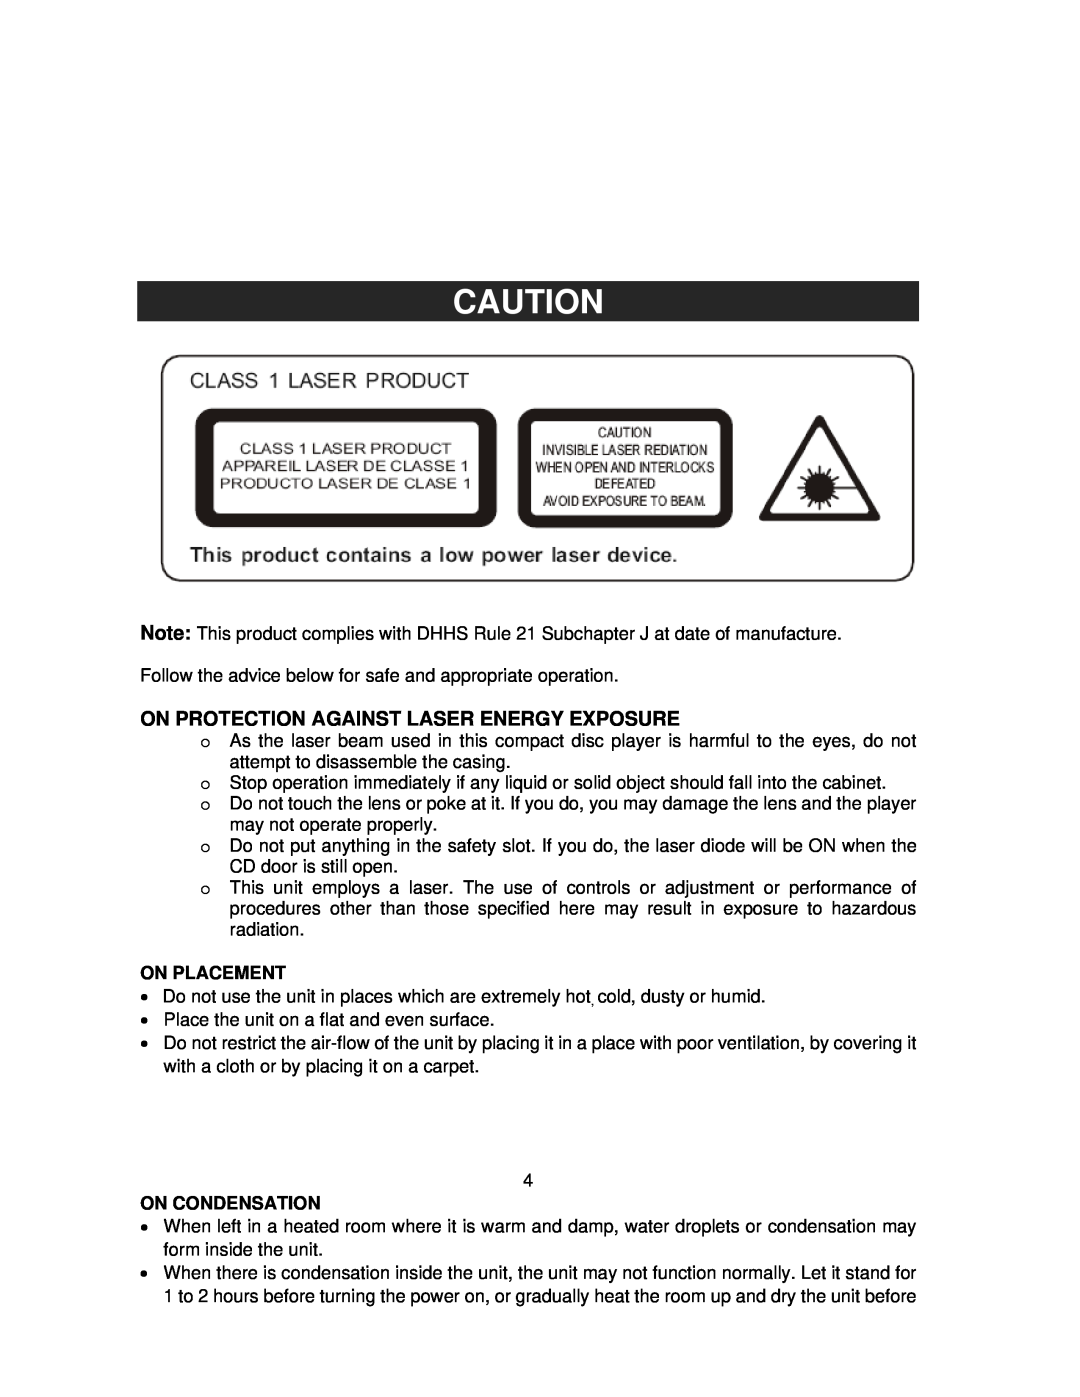 Jensen JMC-1100 owner manual On Protection Against Laser Energy Exposure, On Placement, On Condensation 